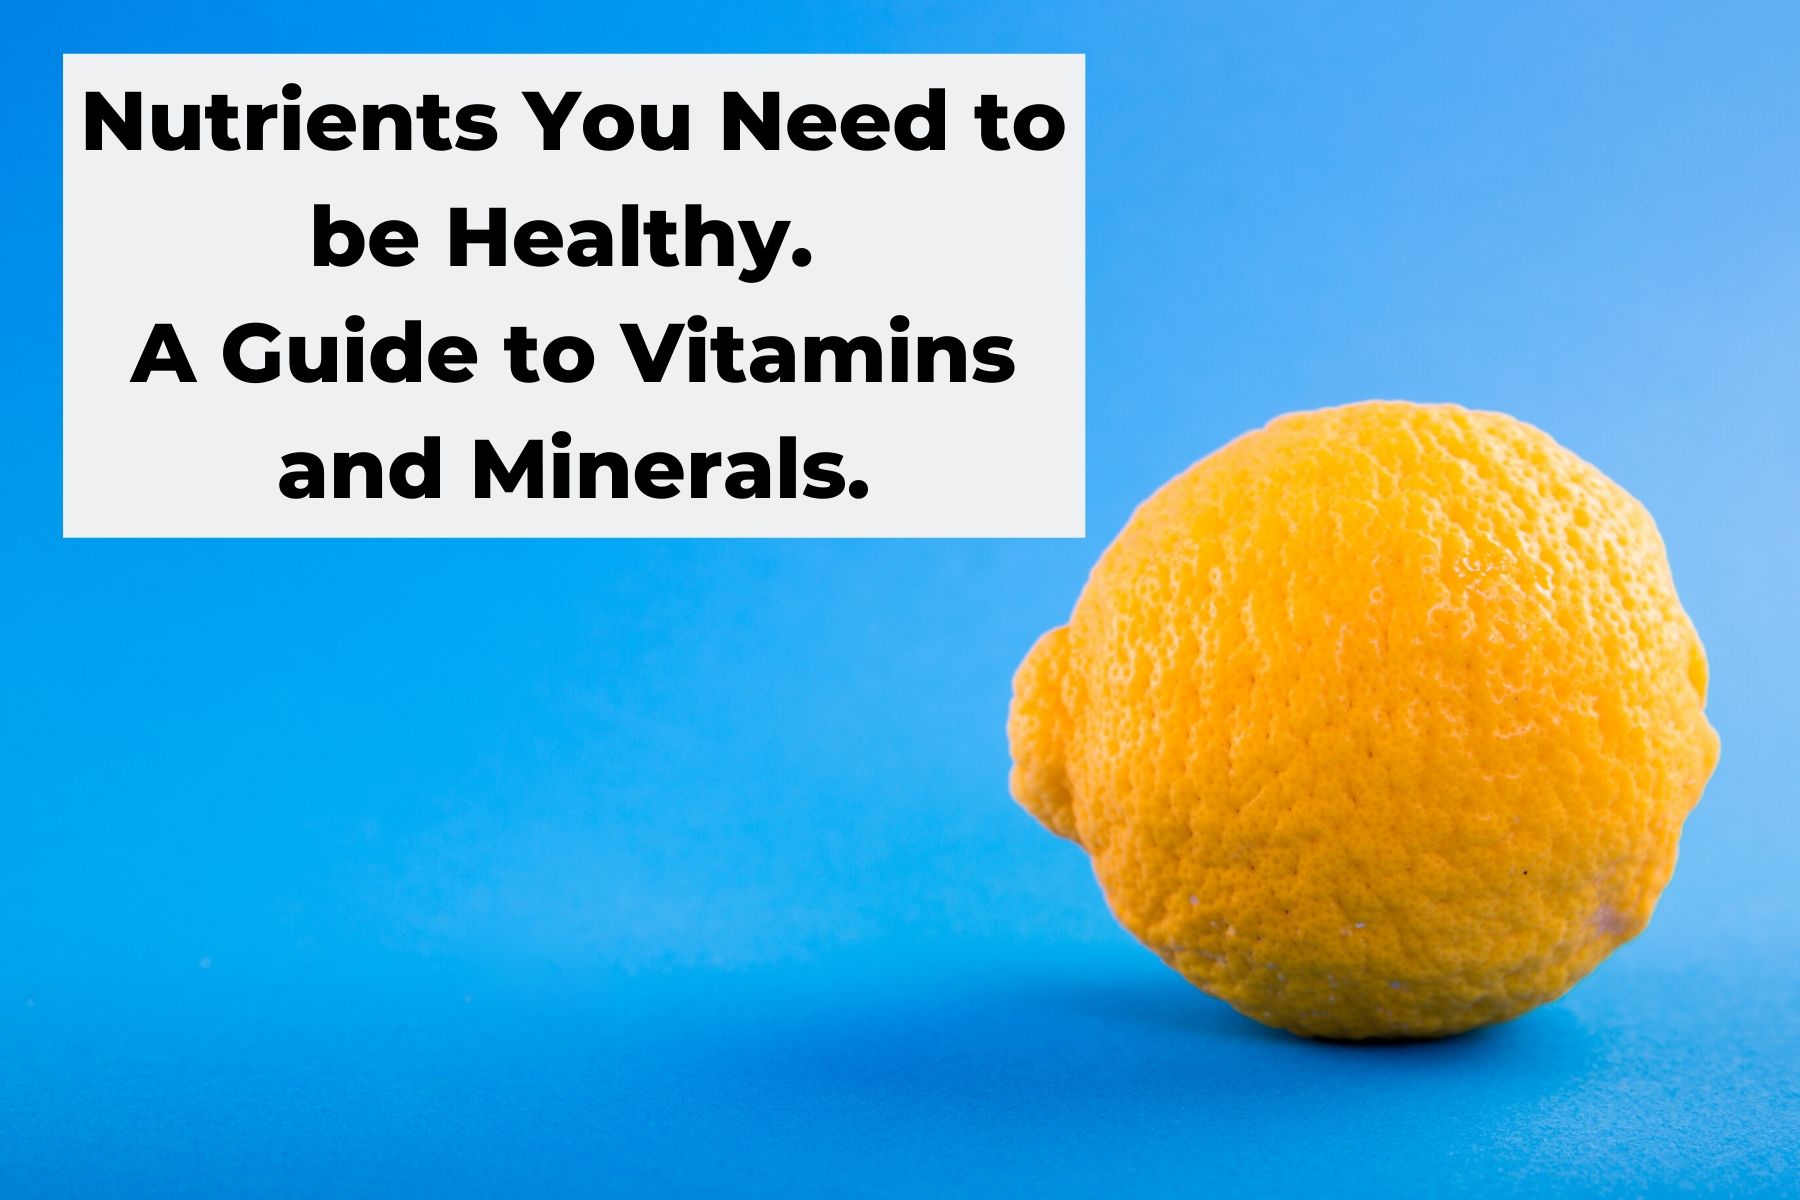 Nutrients you need to be healthy